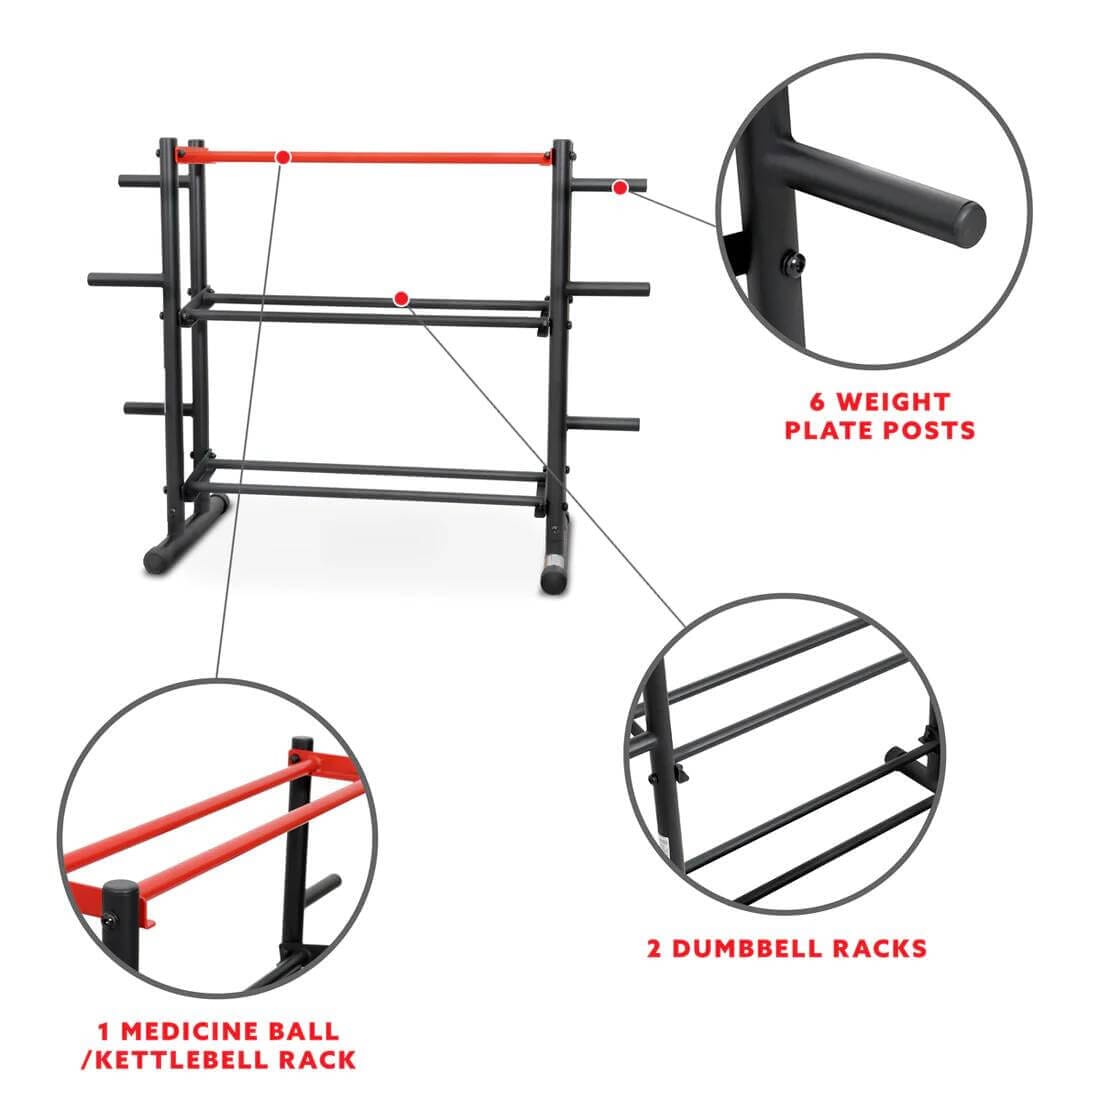 Sunny Health Fitness Compact Weight Storage Rack-Durable Home Gym Organizer-Black-38.6